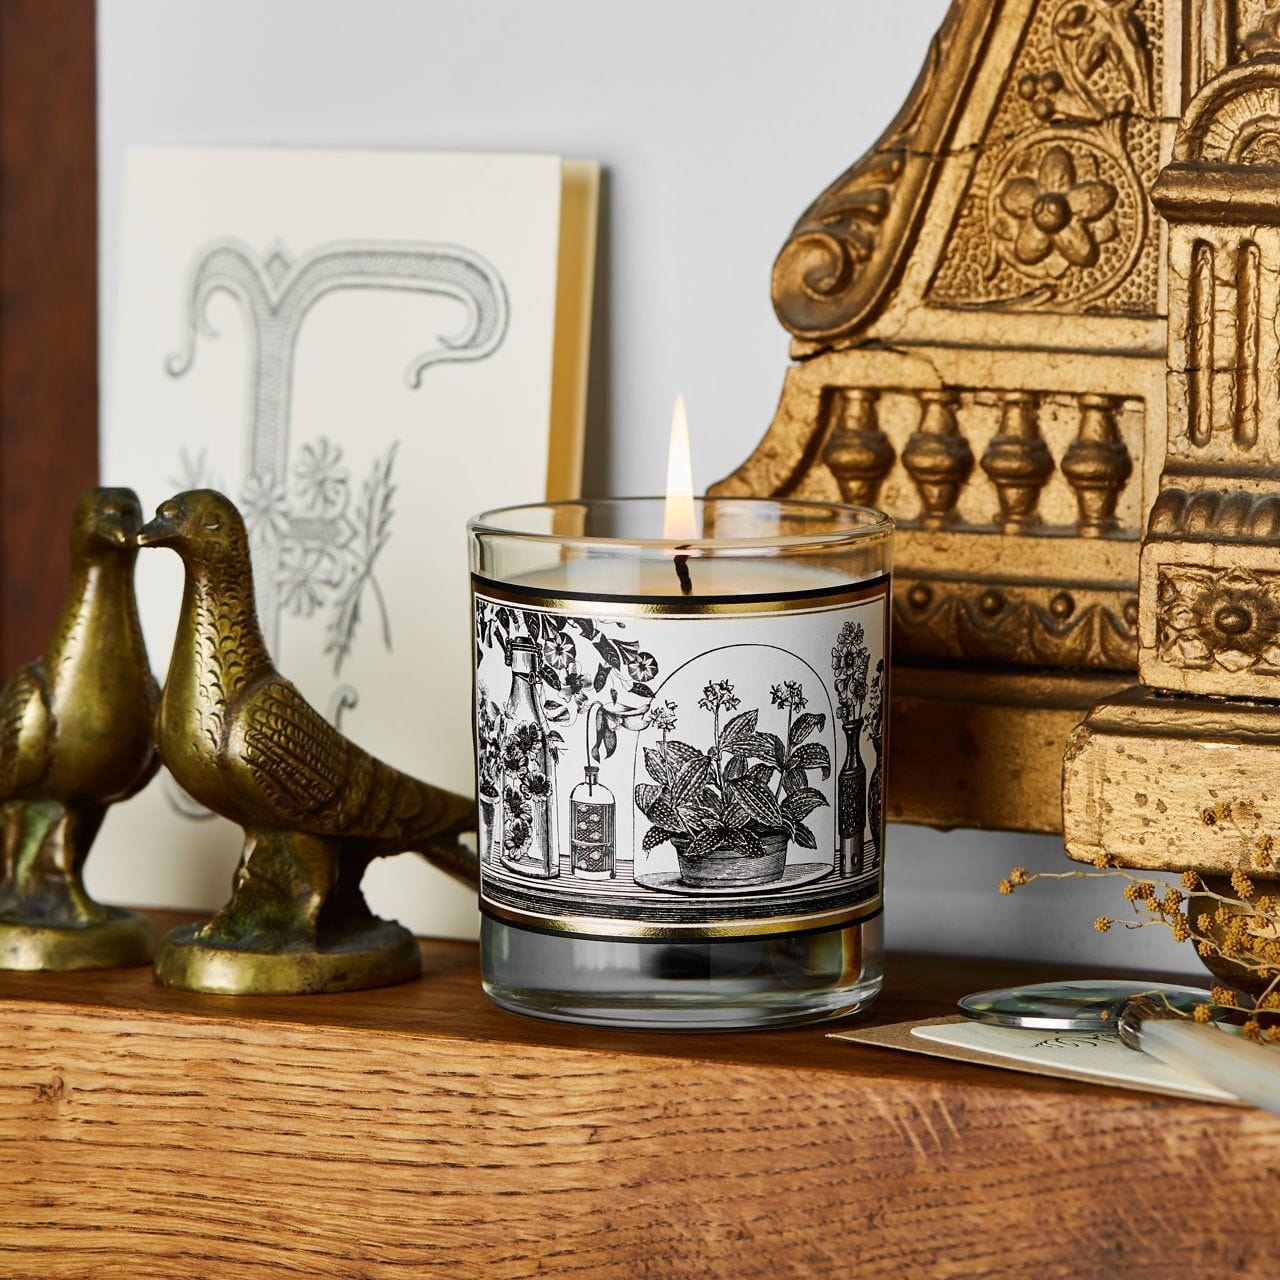 The Botanist Glass Candle - Chase and Wonder - Proudly Made in Britain